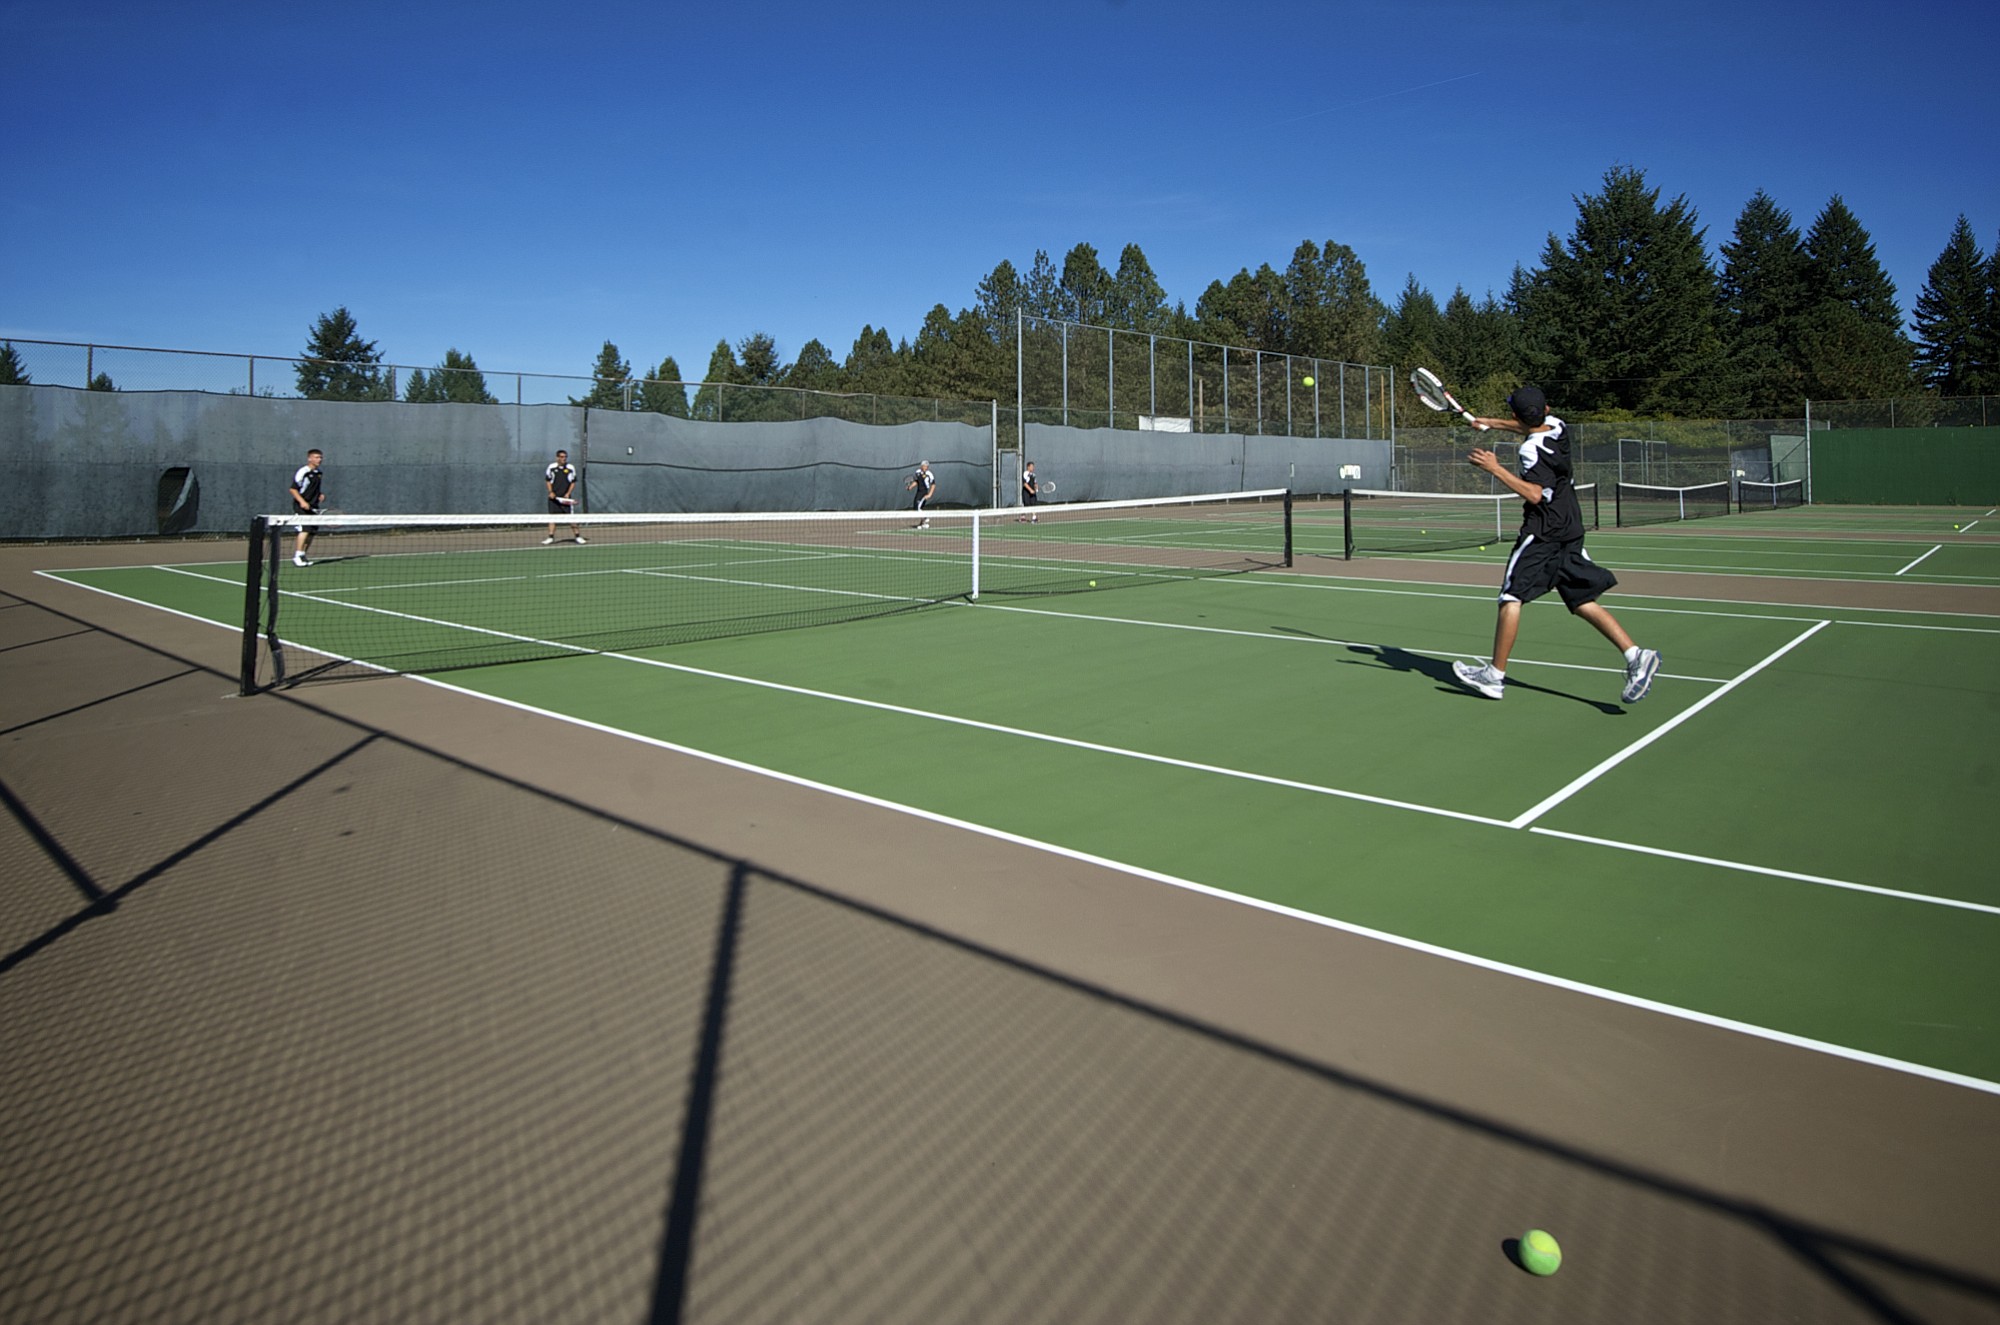 The Evergreen boys tennis team warms up before their match against Skyview on Friday September 19, 2014.